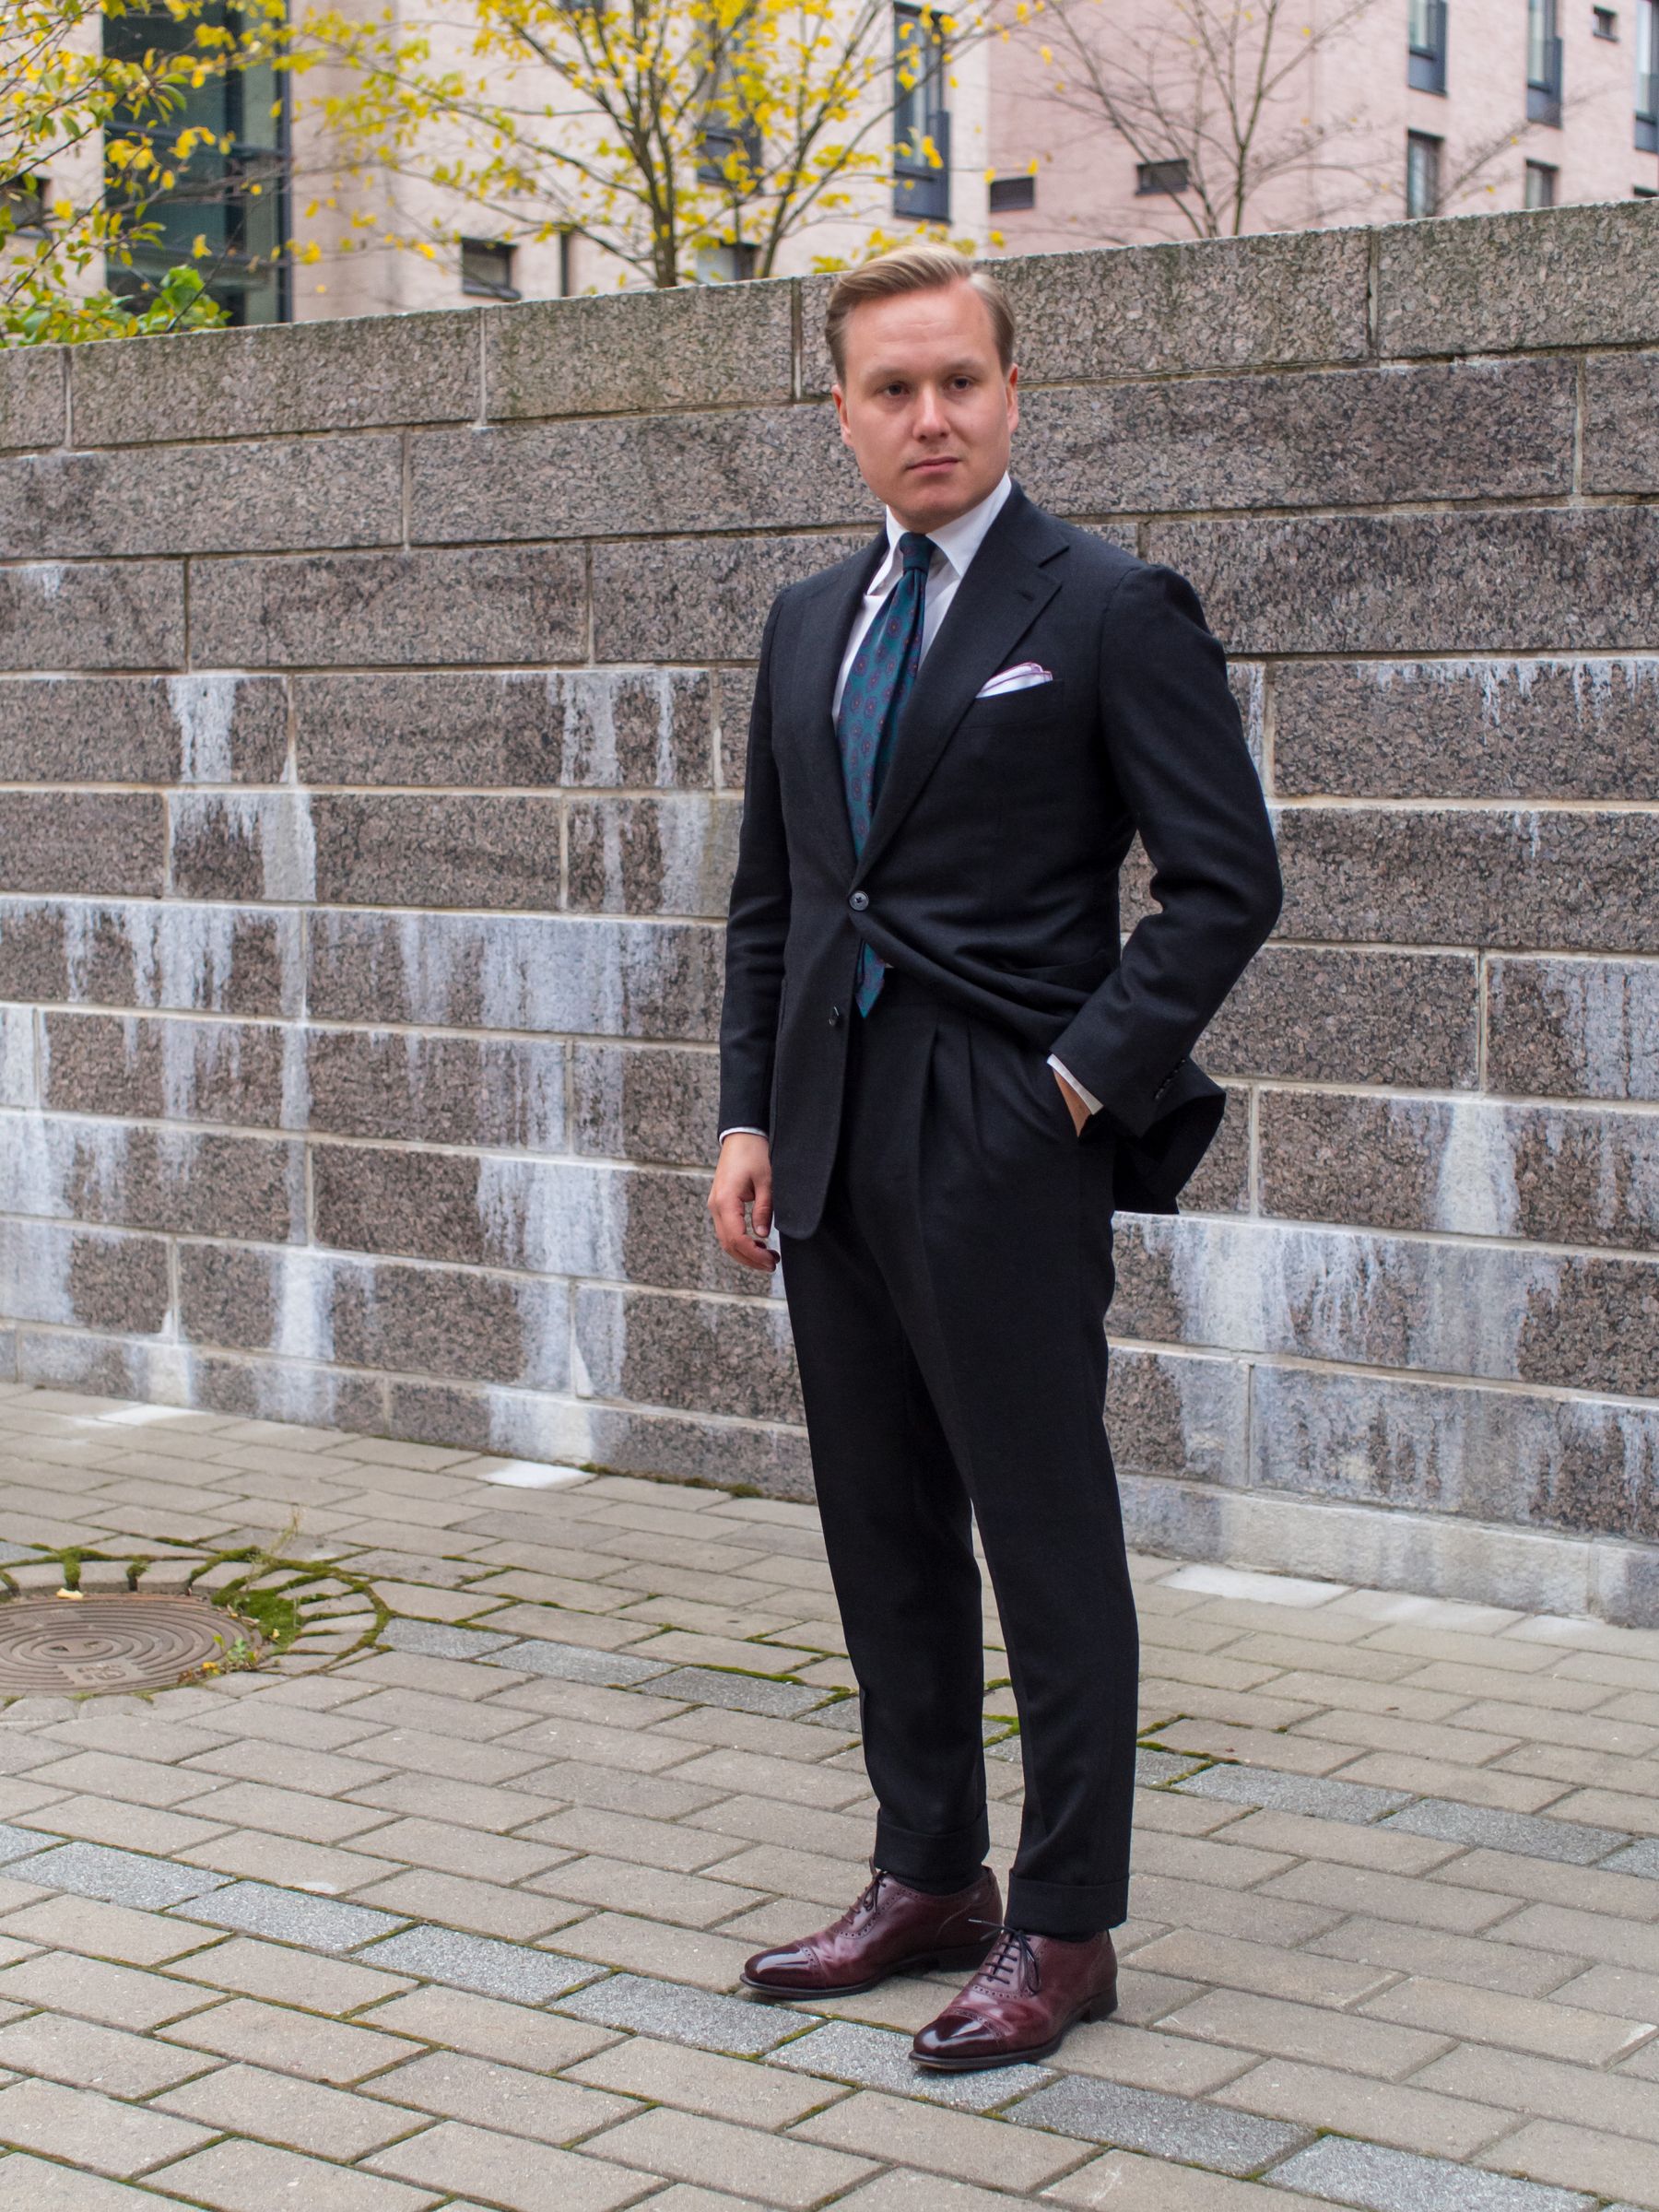 Combining a Grey Suit with Burgundy Shoes